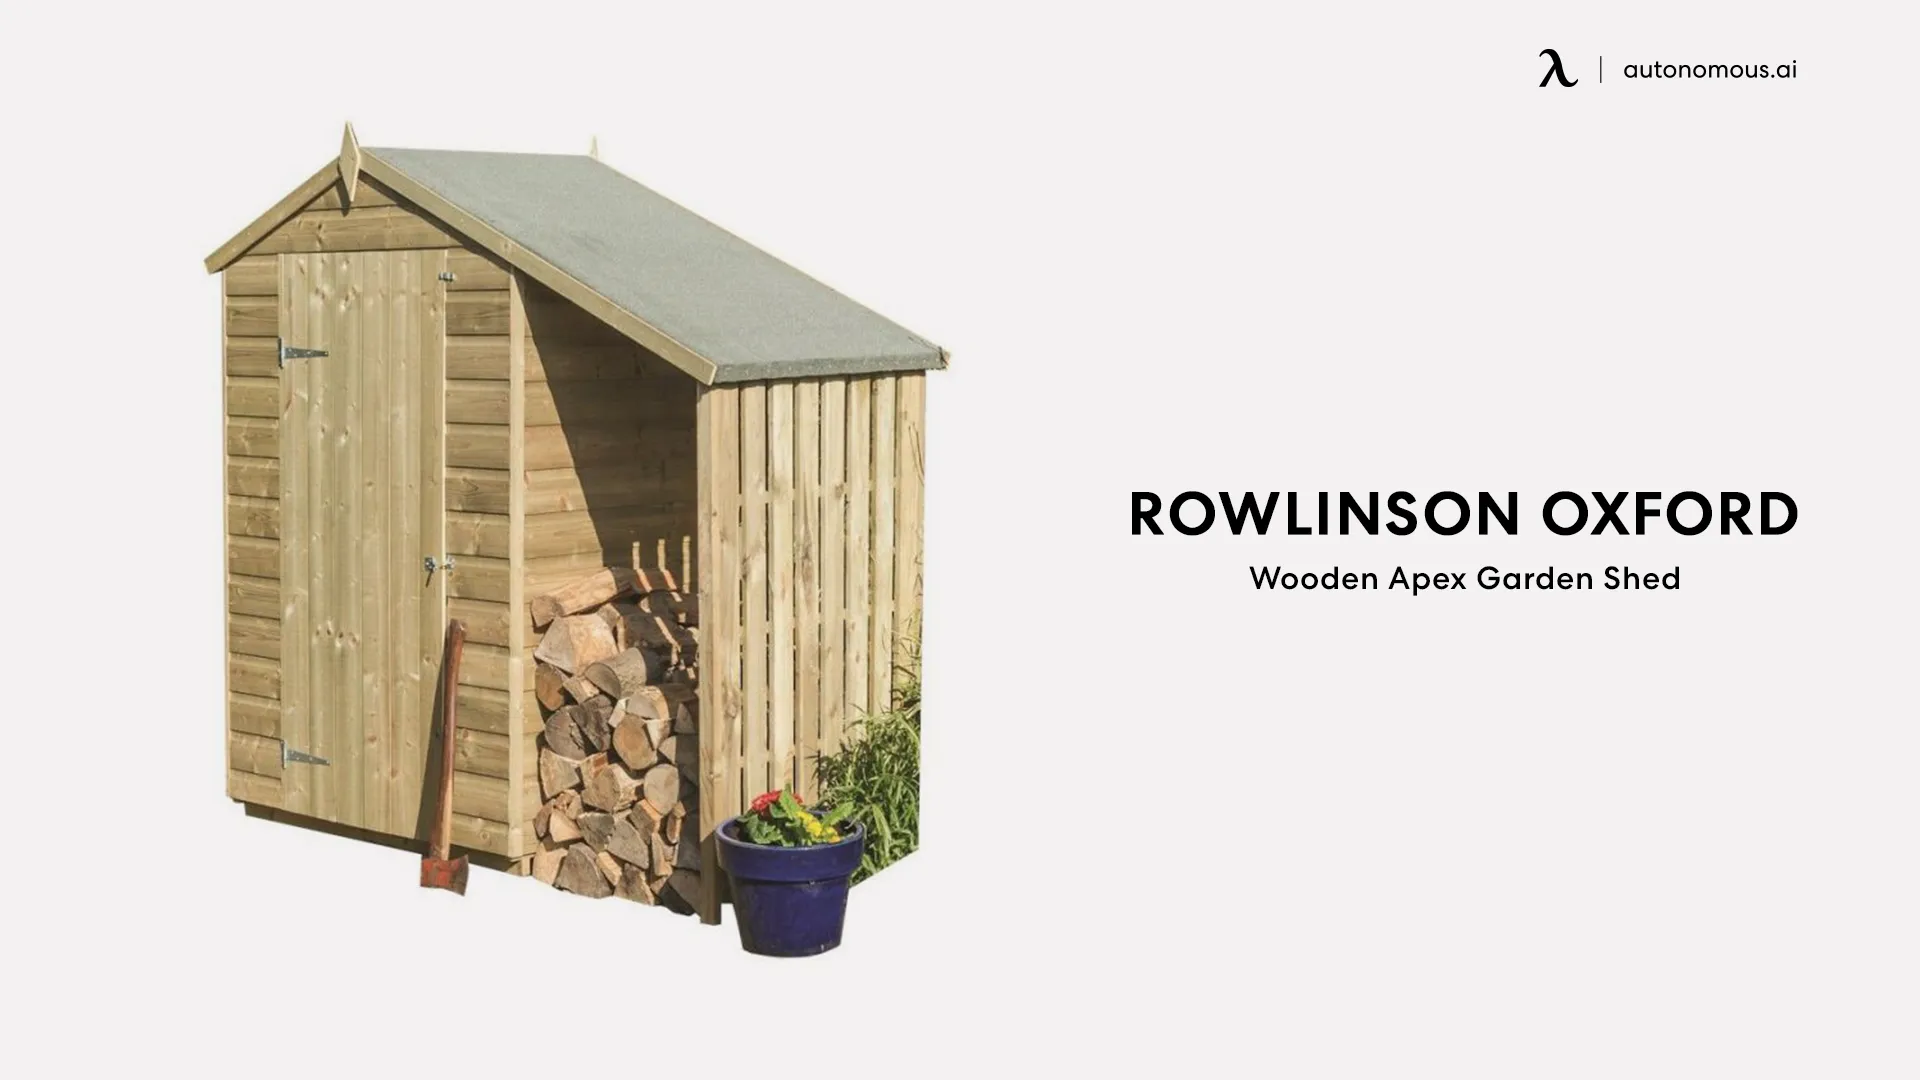 Rowlinson Oxford Wooden Apex Garden Shed with Lean-To, 4 feet by 3 feet